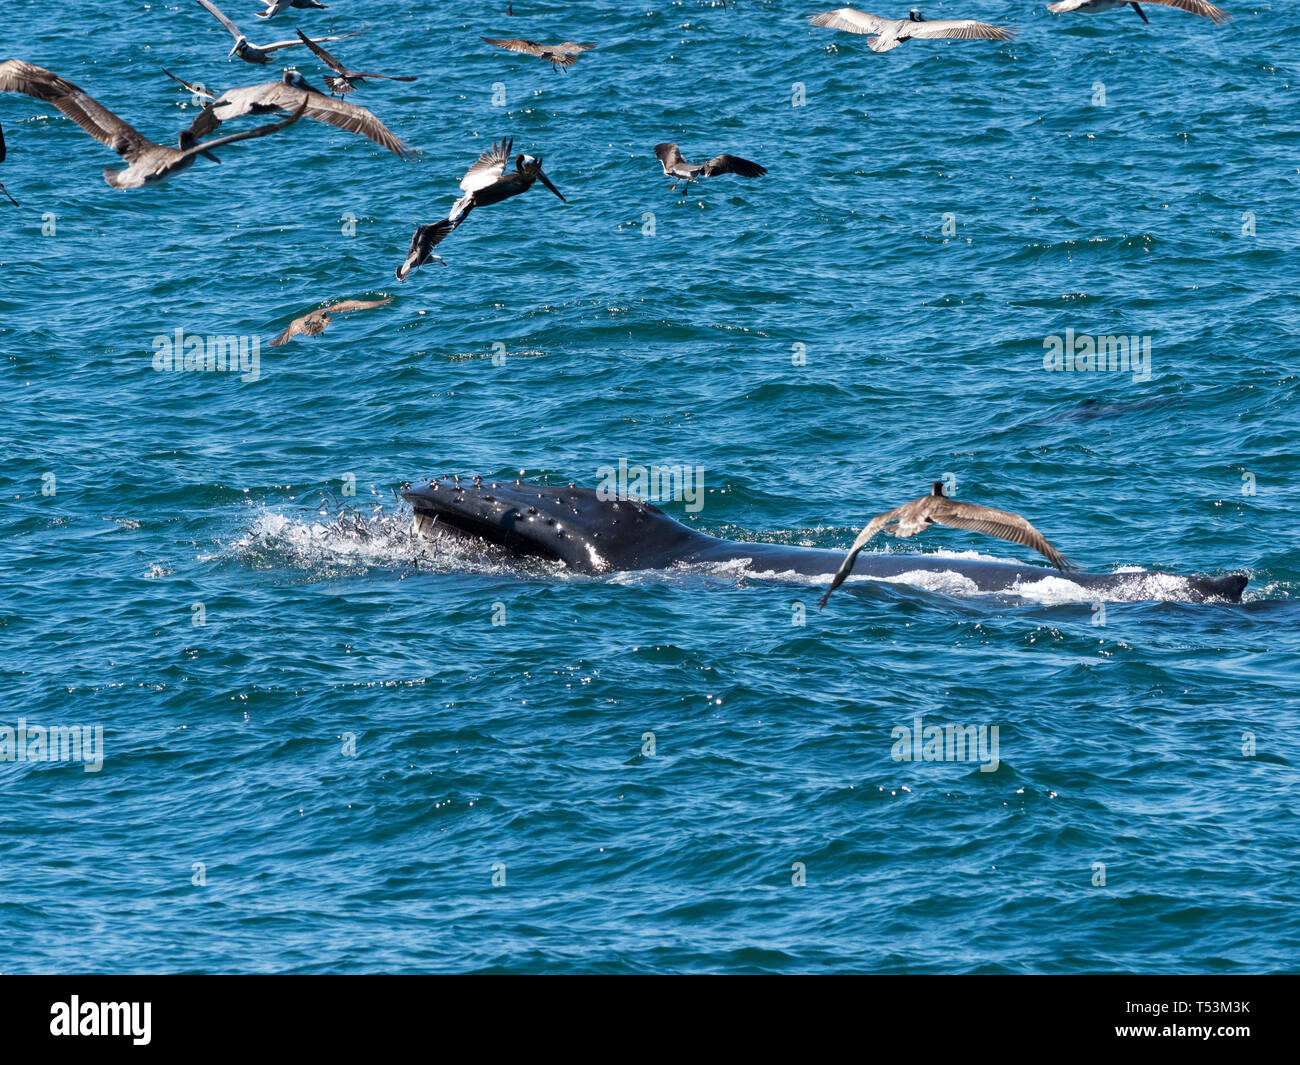 A humpback whale, Megaptera novaeanglidae, lunge feeds at the surface with mouth agape showing its baleen in Baja Mexico Stock Photo